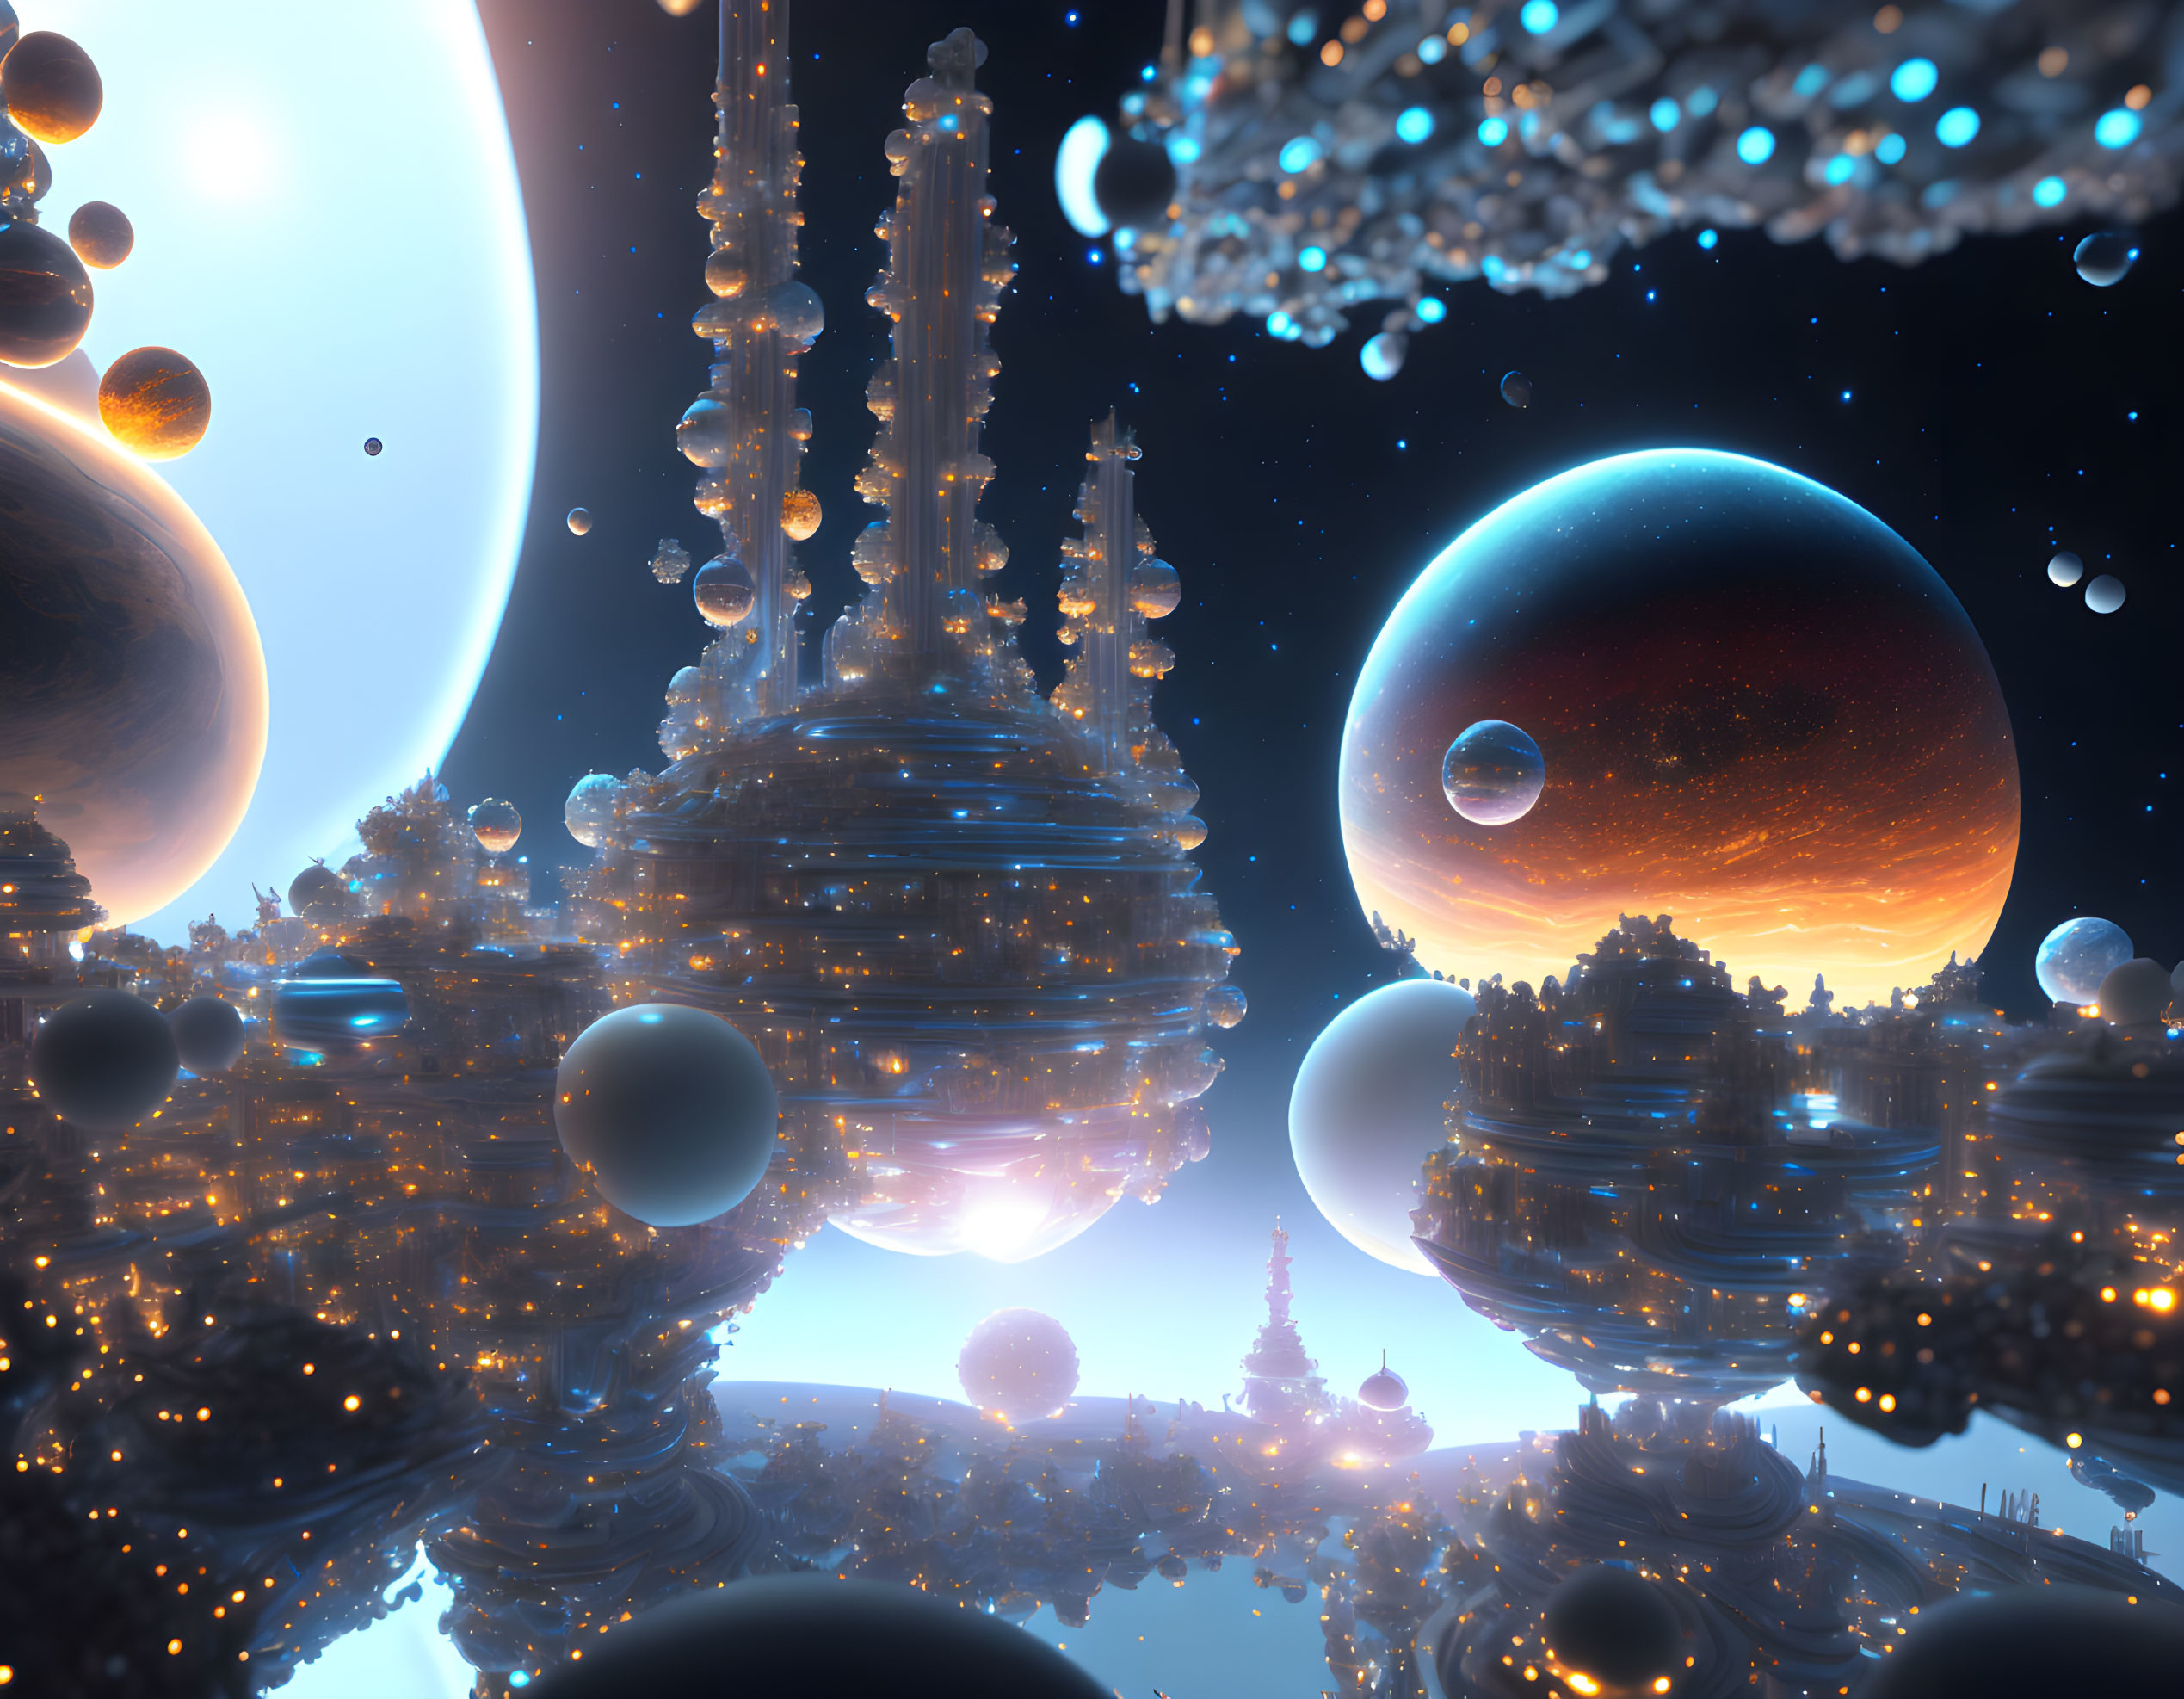 Futuristic cityscape with glowing structures and floating orbs under cosmic sky